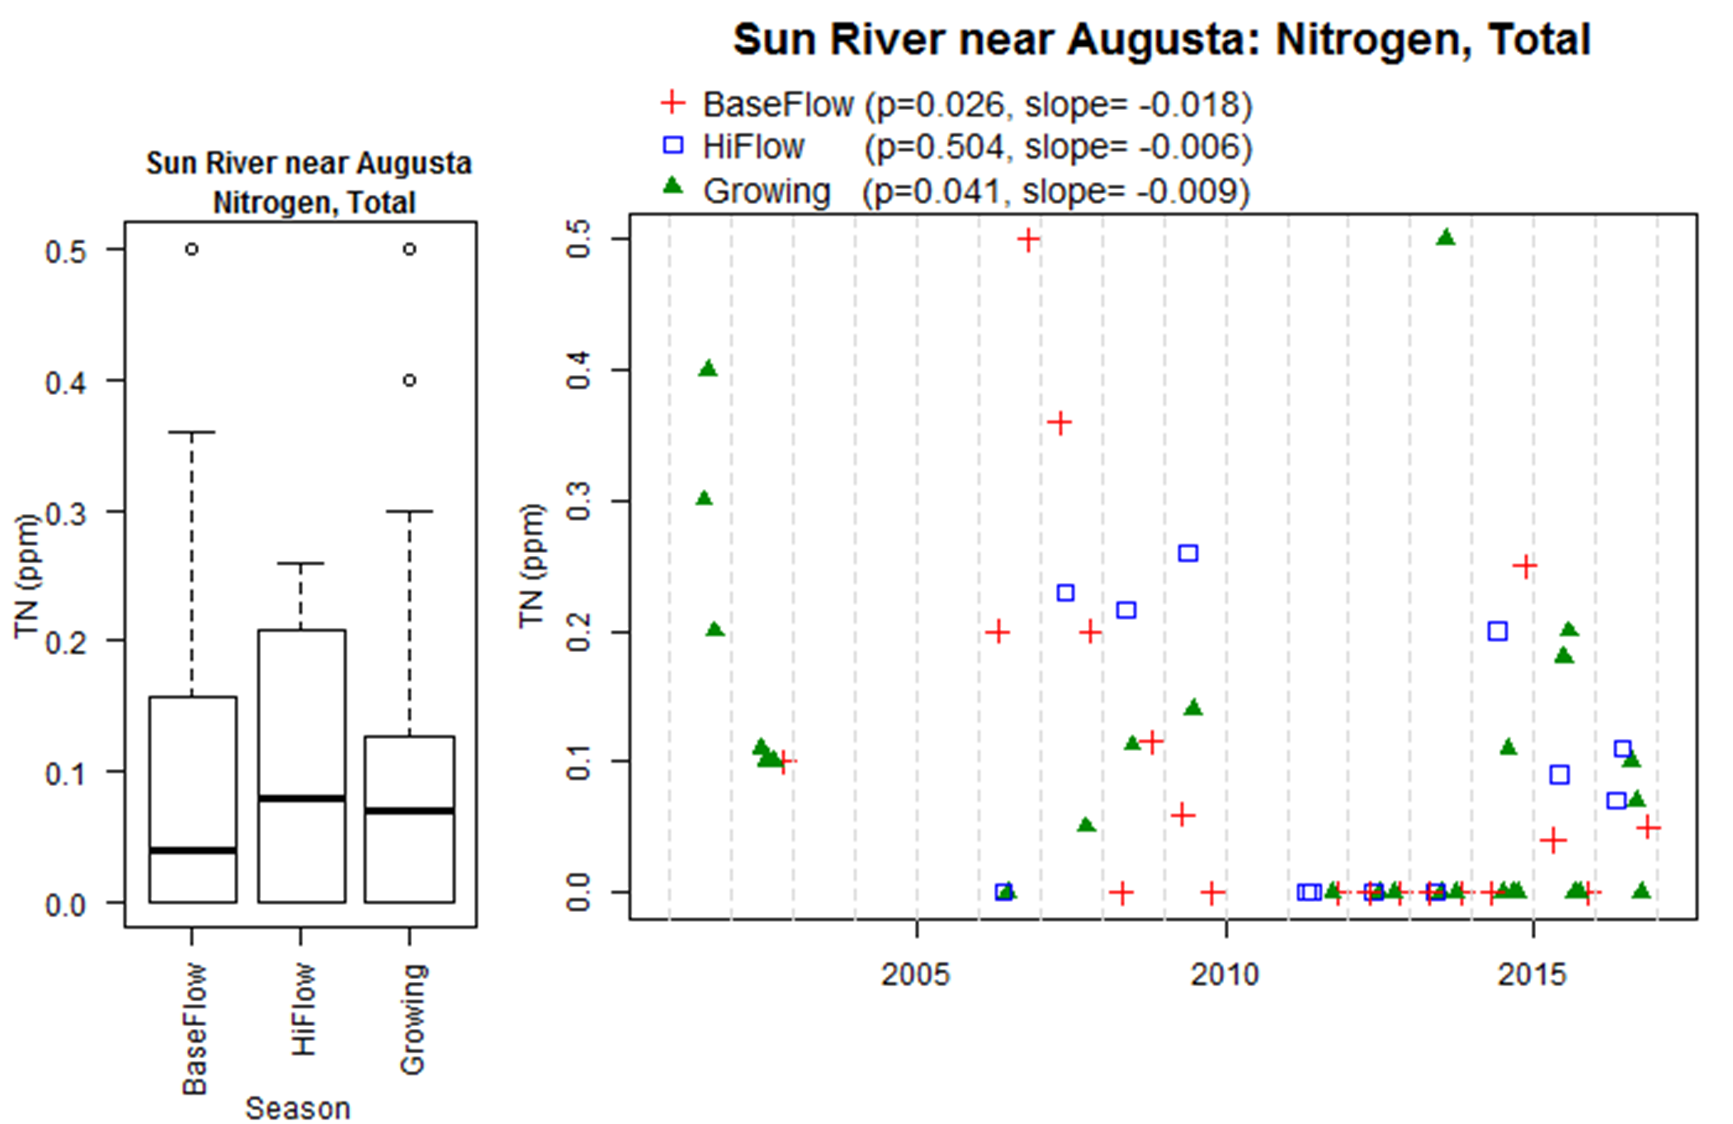 scatter plot of total nitrogen concentrations at sun river near augusta site.